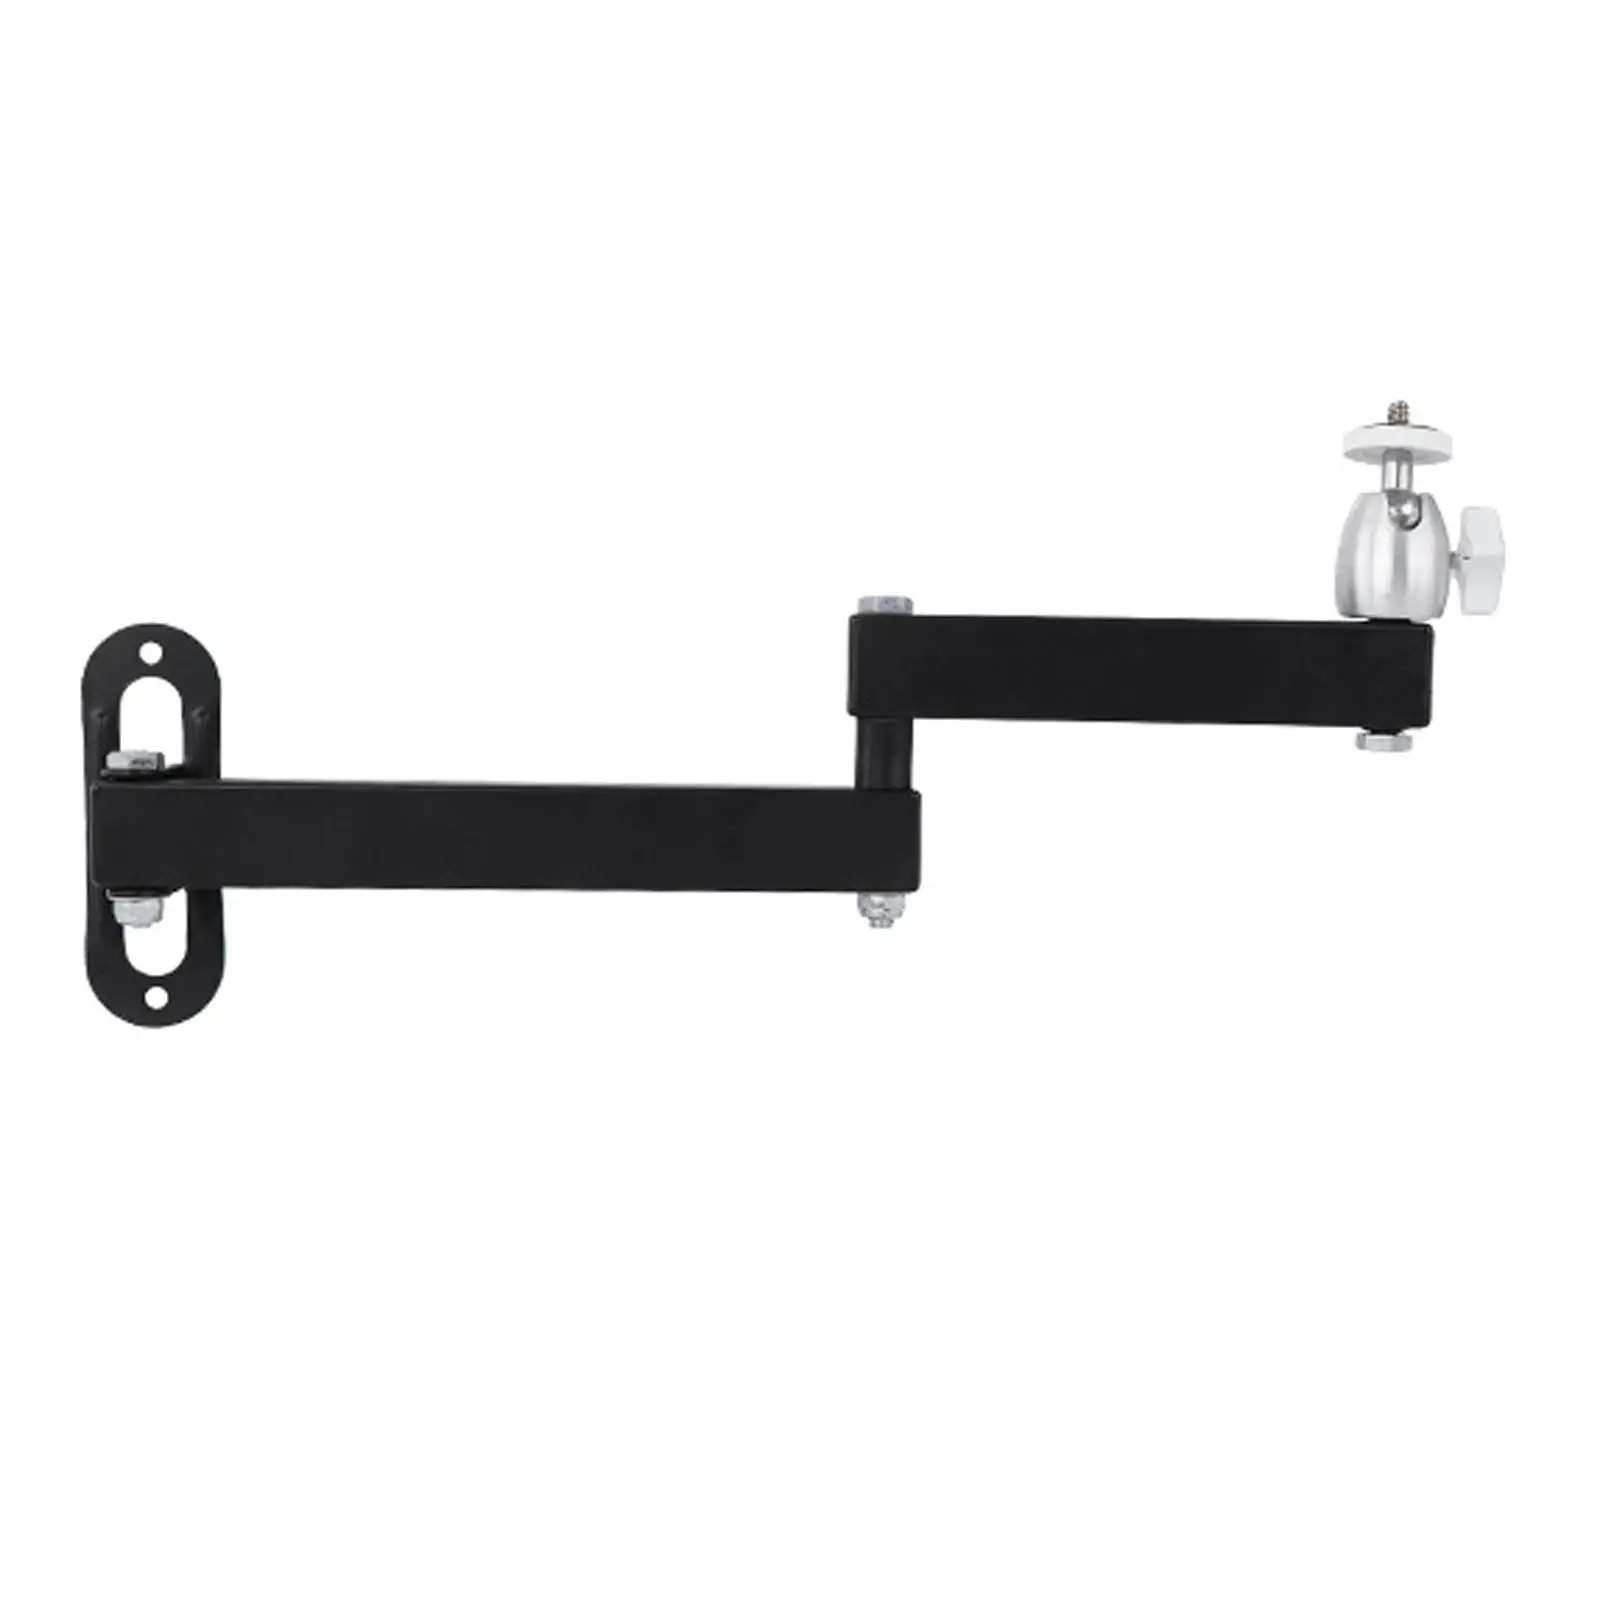 Universal Projector Bracket Multifunctional Wall Mount Ceiling Mount for Bedside